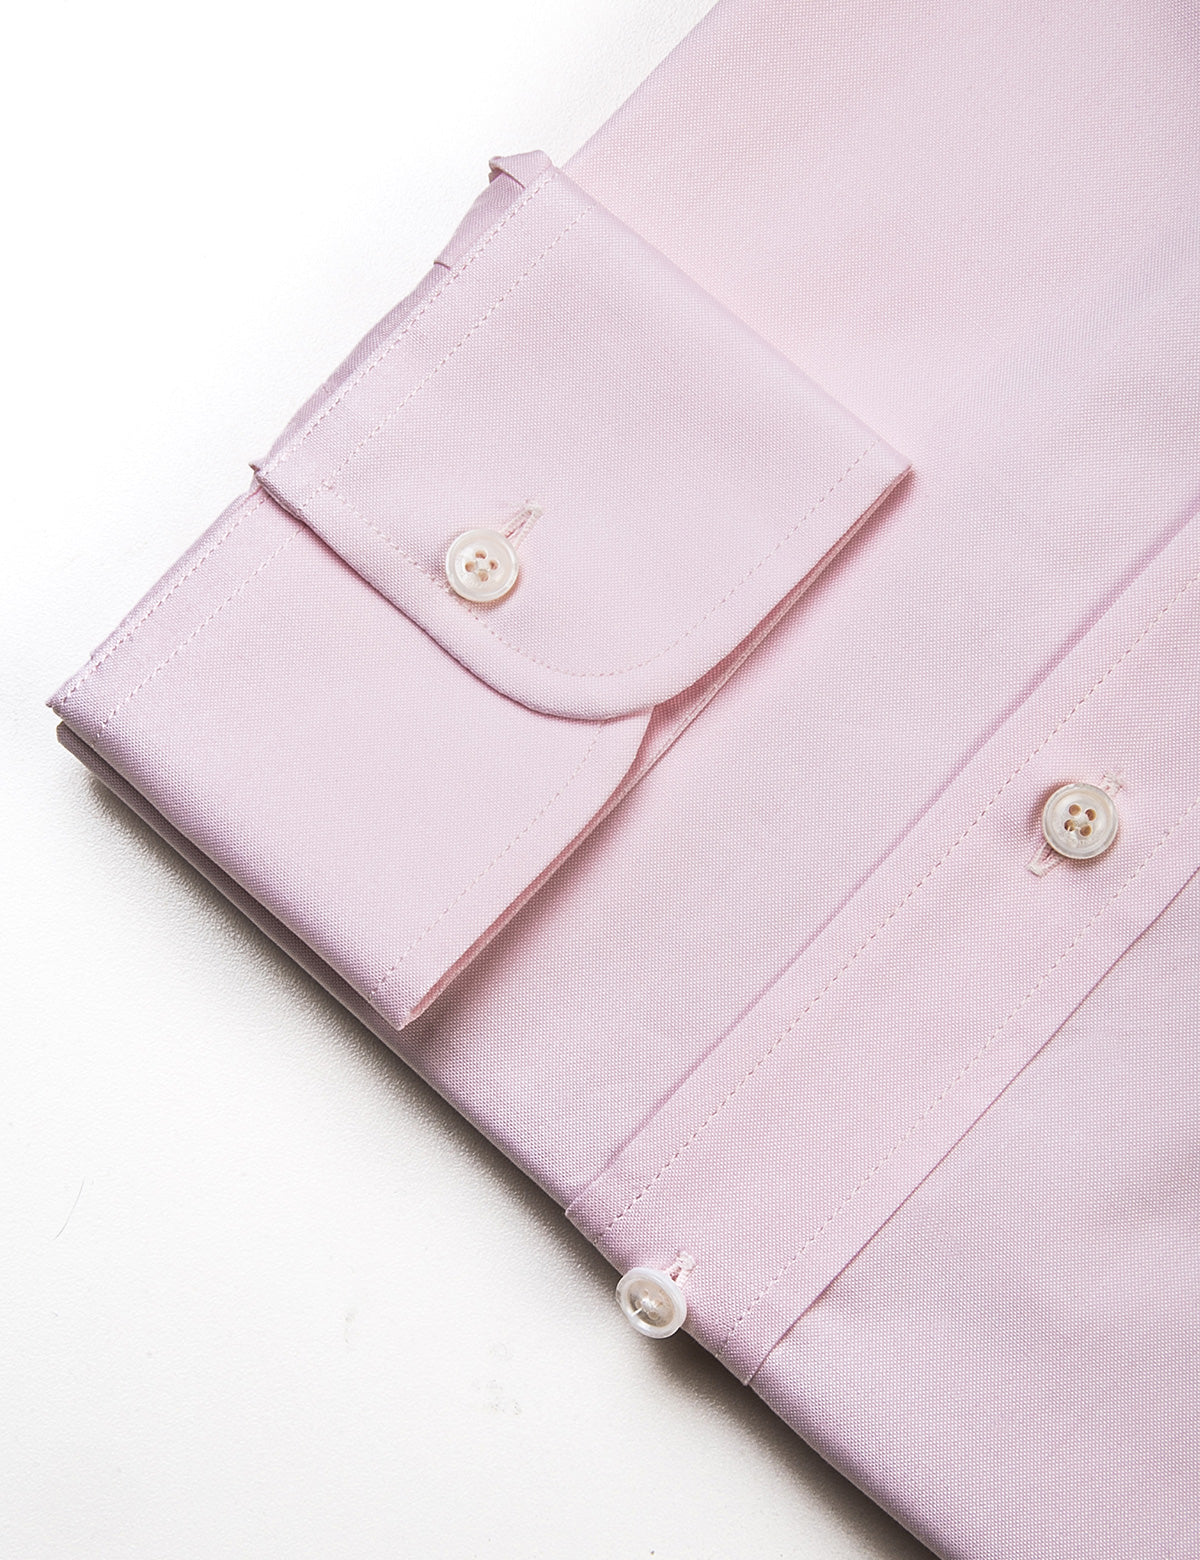 BKT20 Slim Dress Shirt in Pinpoint Oxford - Pale Pink